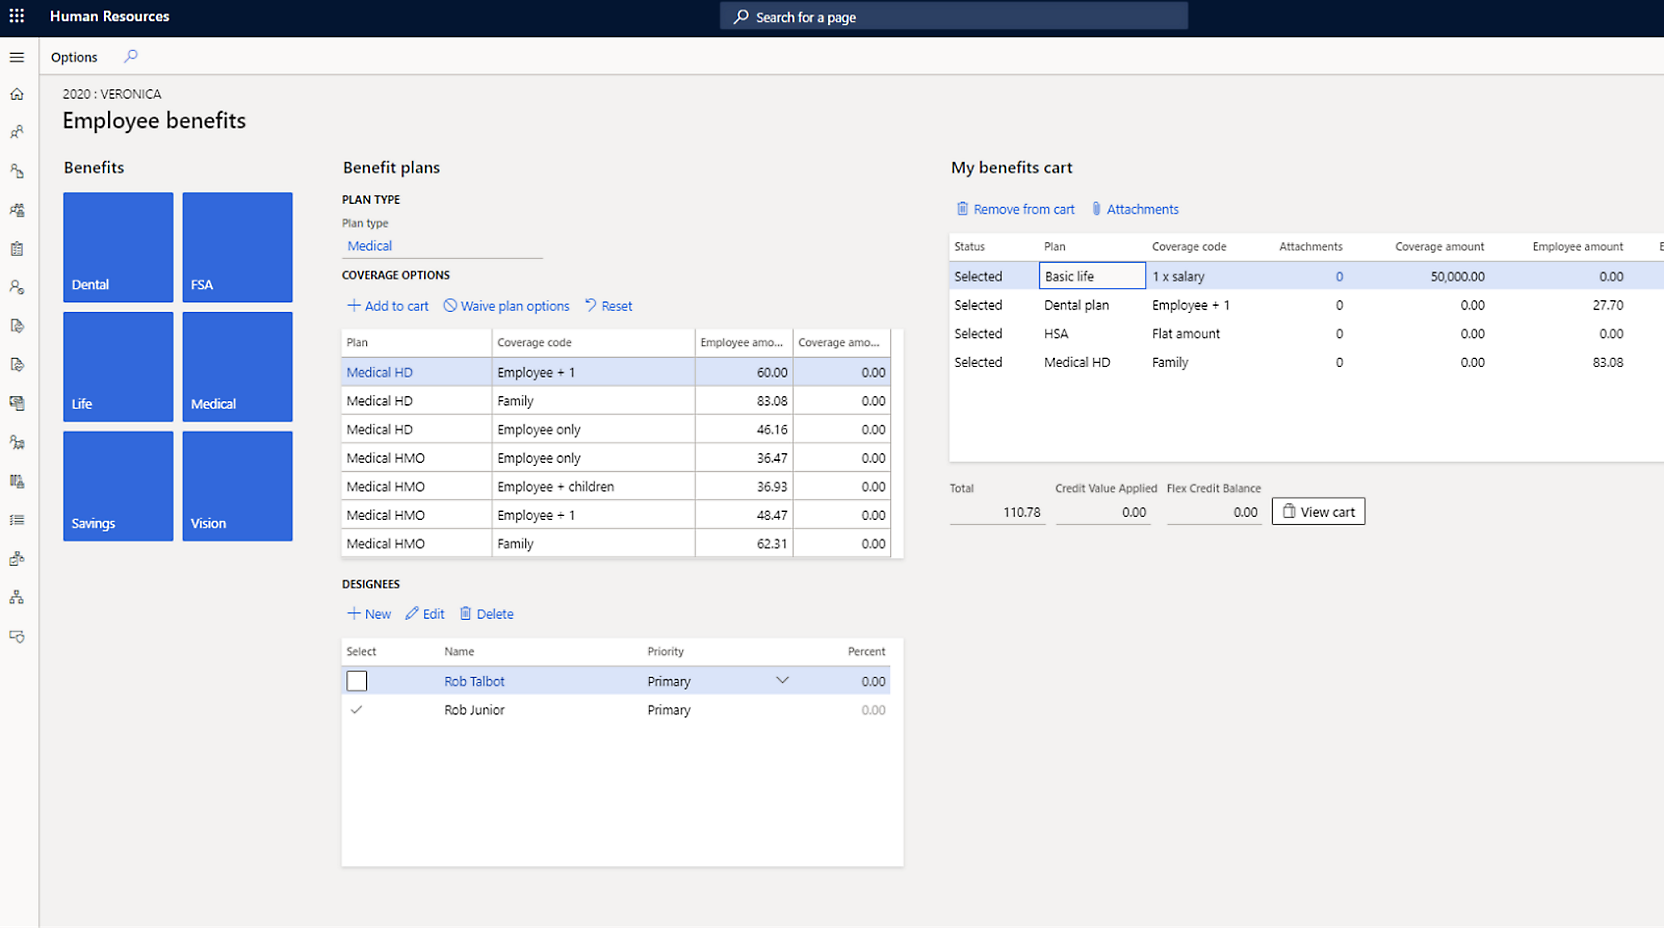 Screenshot of an employee benefits selection interface showing healthcare plans, coverage options, dependents